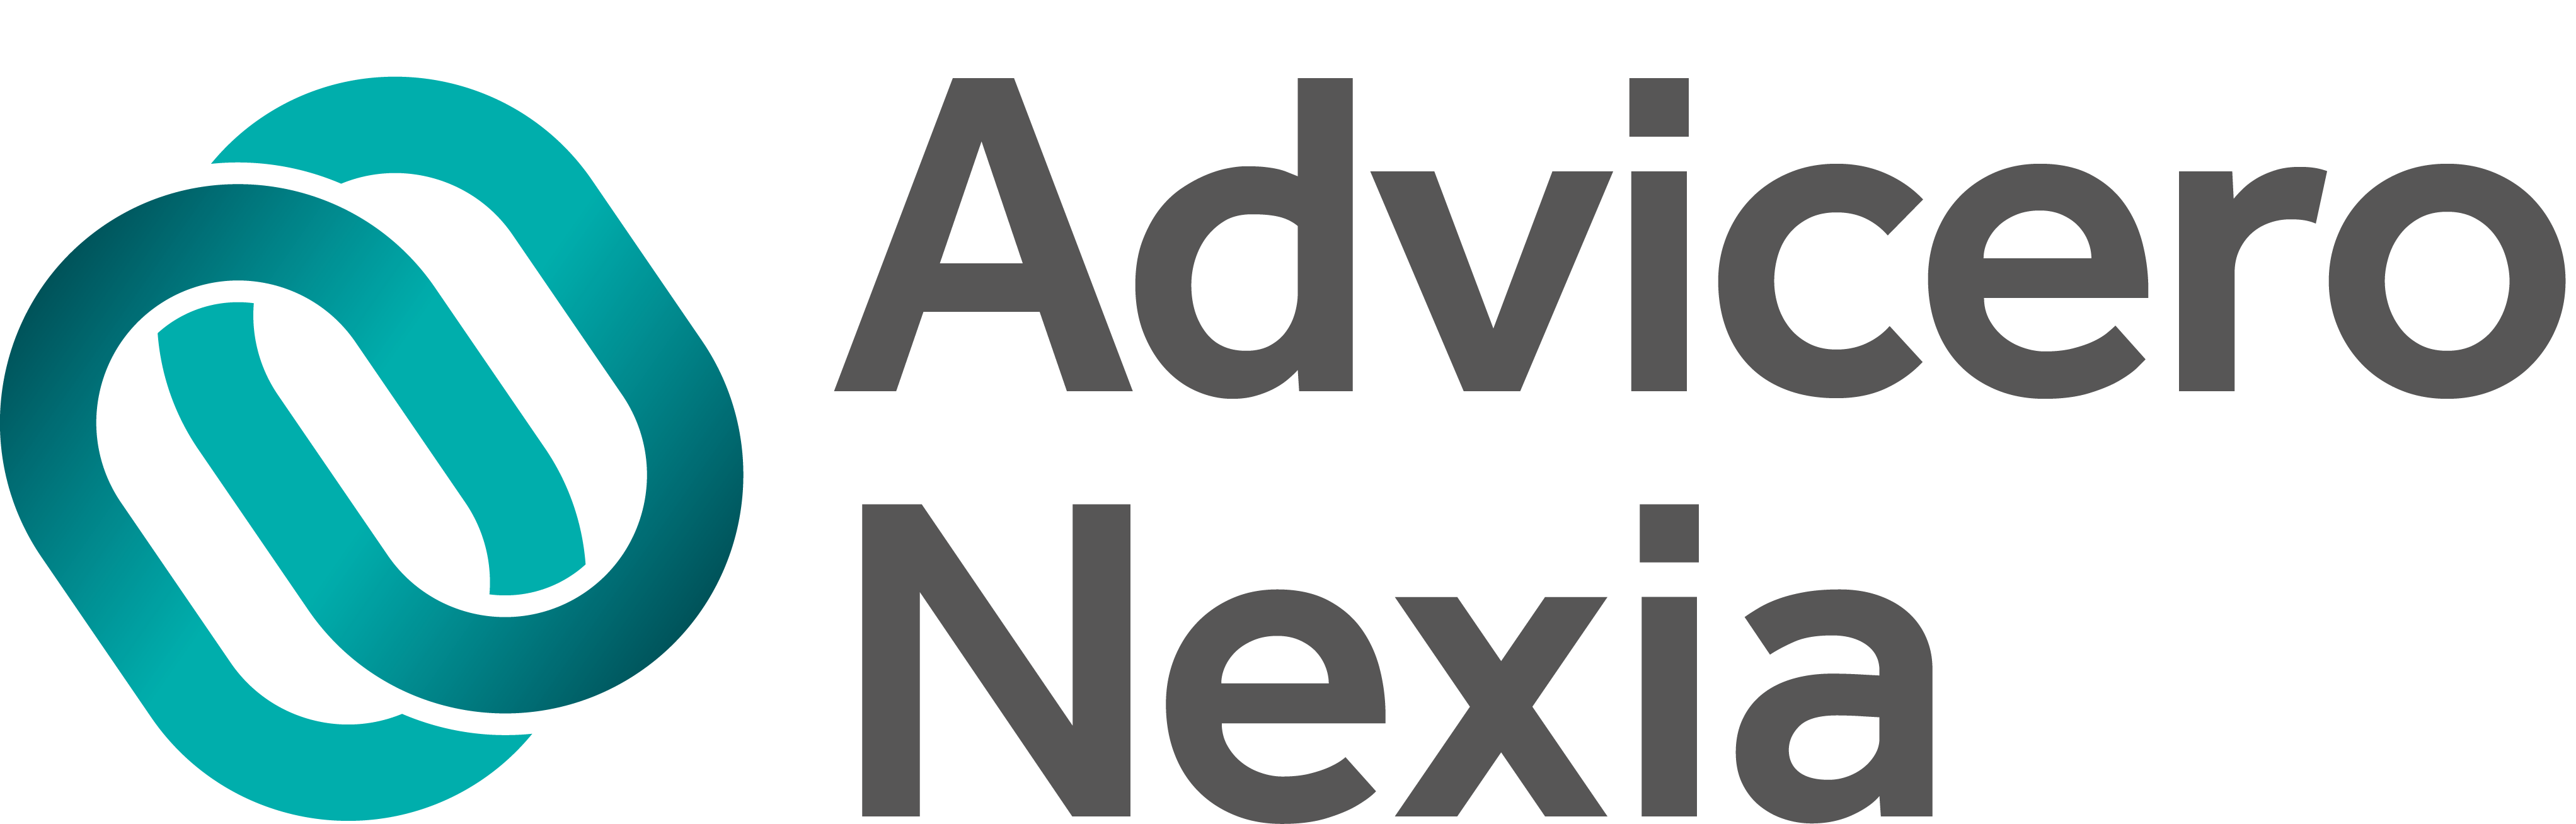 NEXIA advicero 1L CMYK GRADIENT - Business Breakfast 9.05.19 - Are you planning to sell your business? How to prepare for the entry of a new investor?